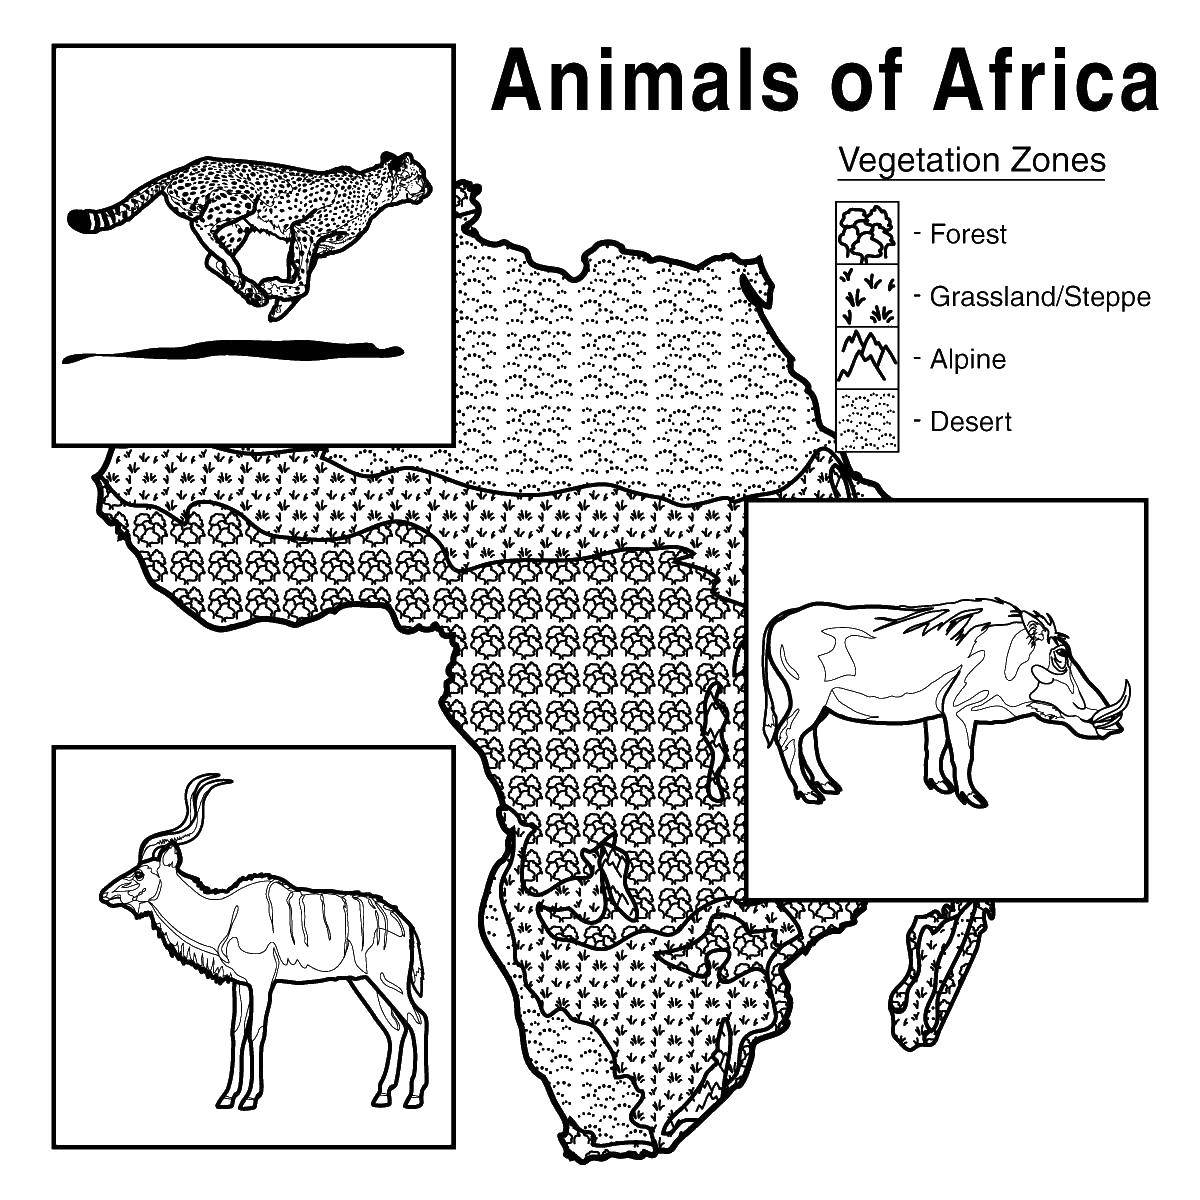 Coloring Animals of Africa by zones. Category coloring. Tags:  animals, Africa, map.